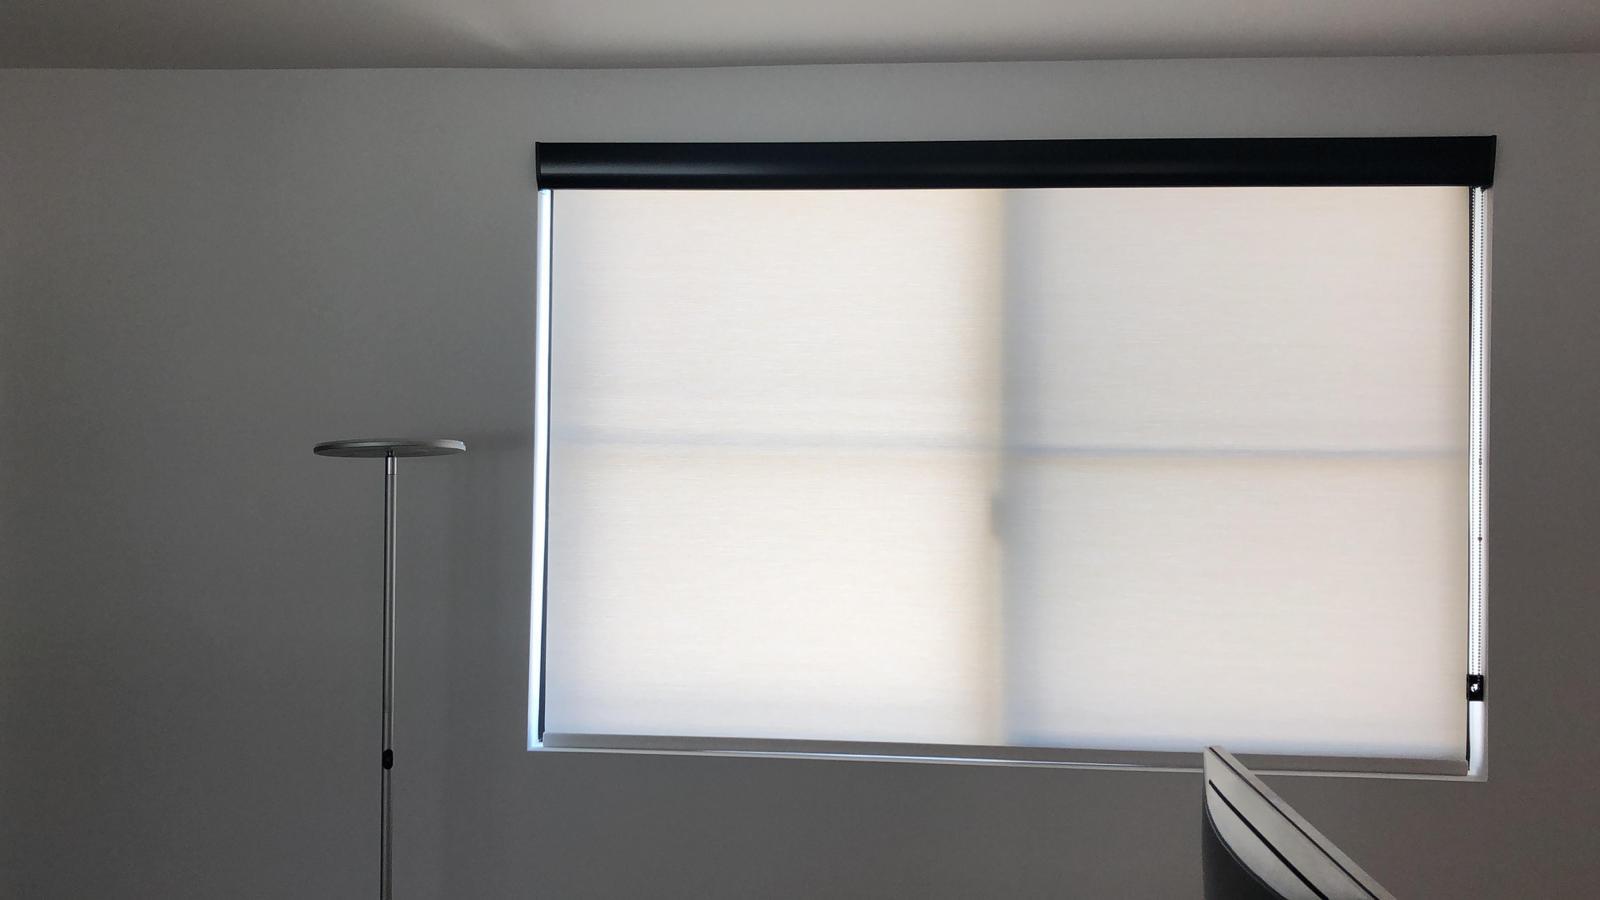 Solar shades effectively filter and diffuse natural sunlight, block out harmful UV rays, and keep your rooms cooler proving to be an energy efficient option. Are available in various styles and openness levels, depending on the degree of clarity desired.